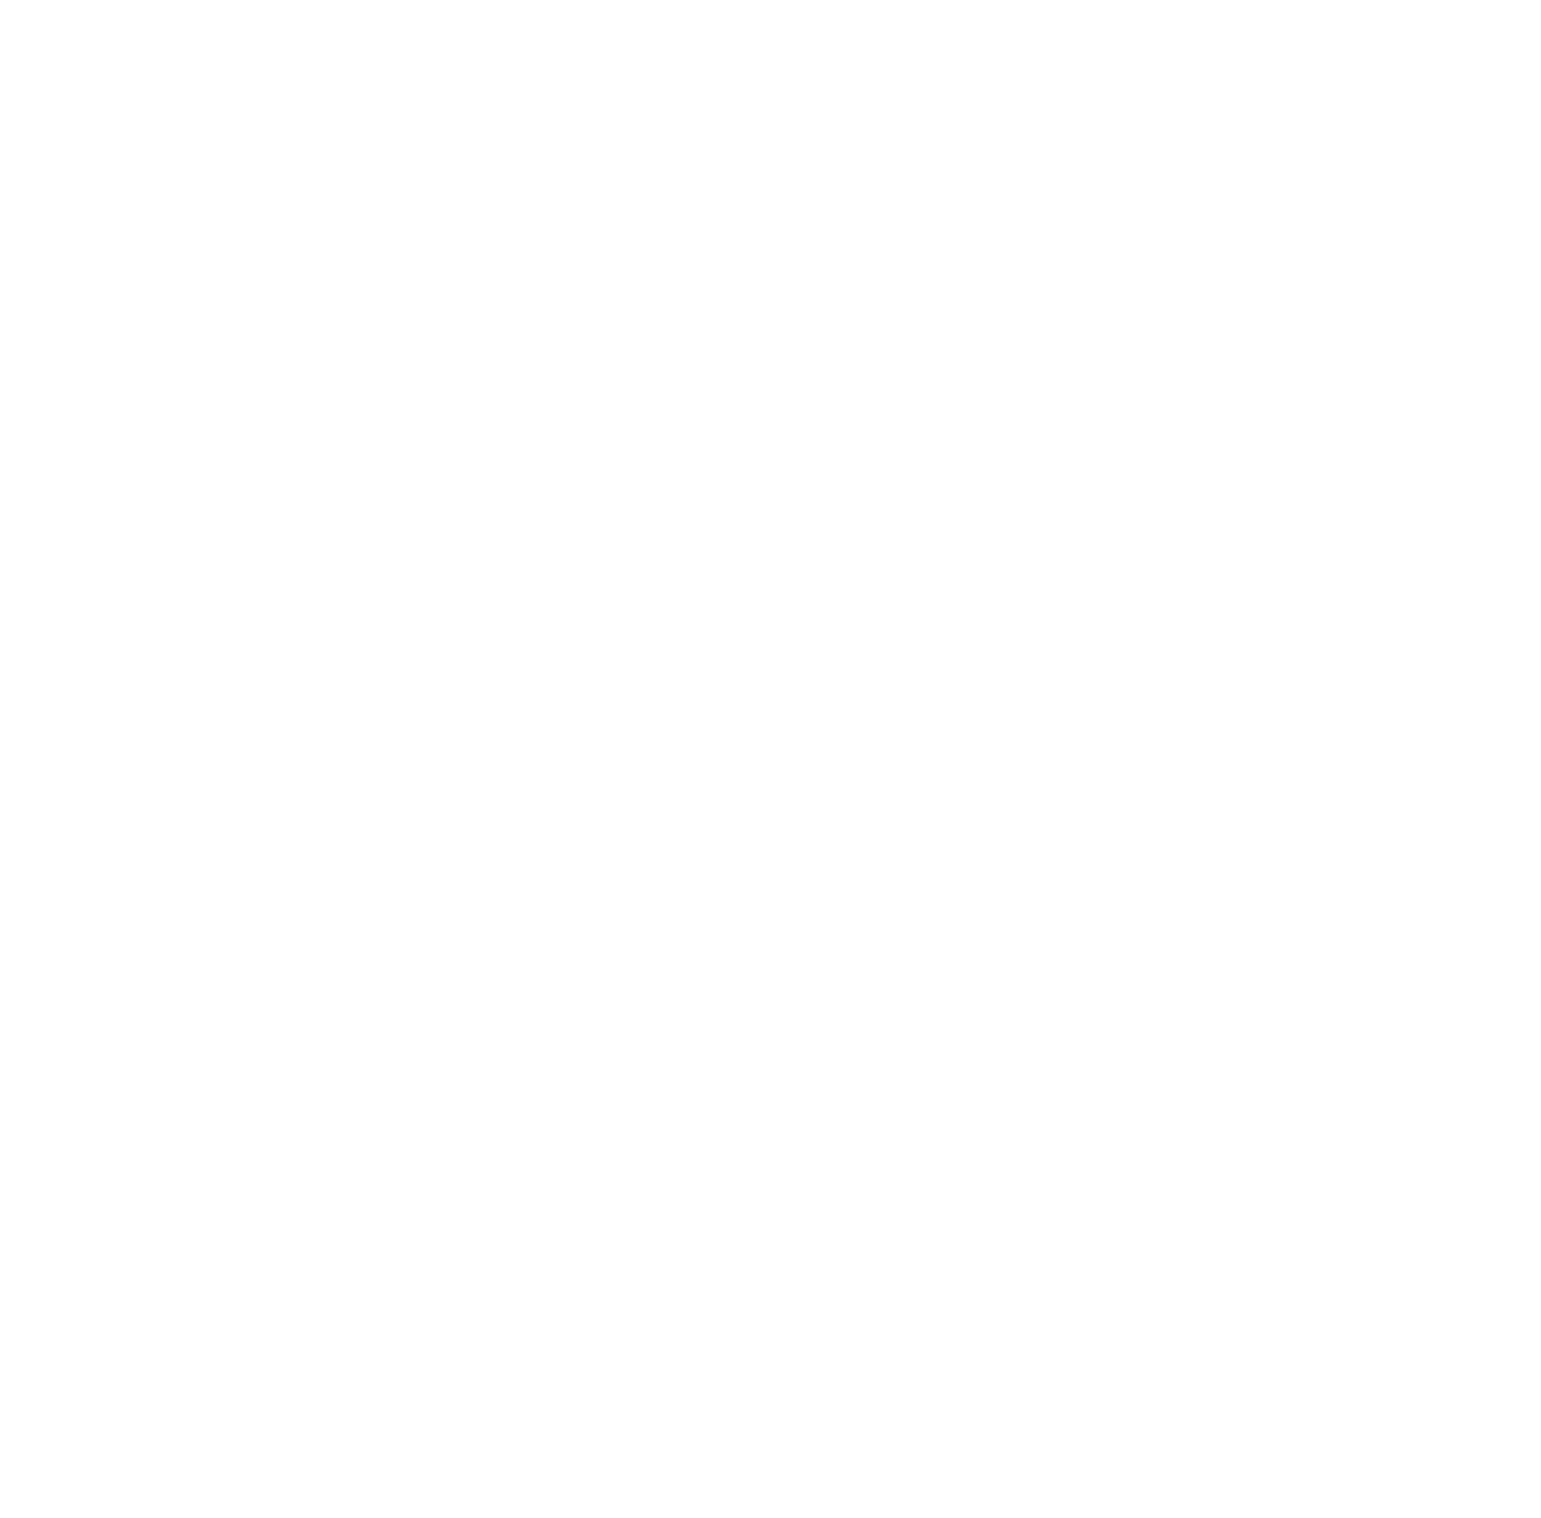 Global Power Synergy logo for dark backgrounds (transparent PNG)